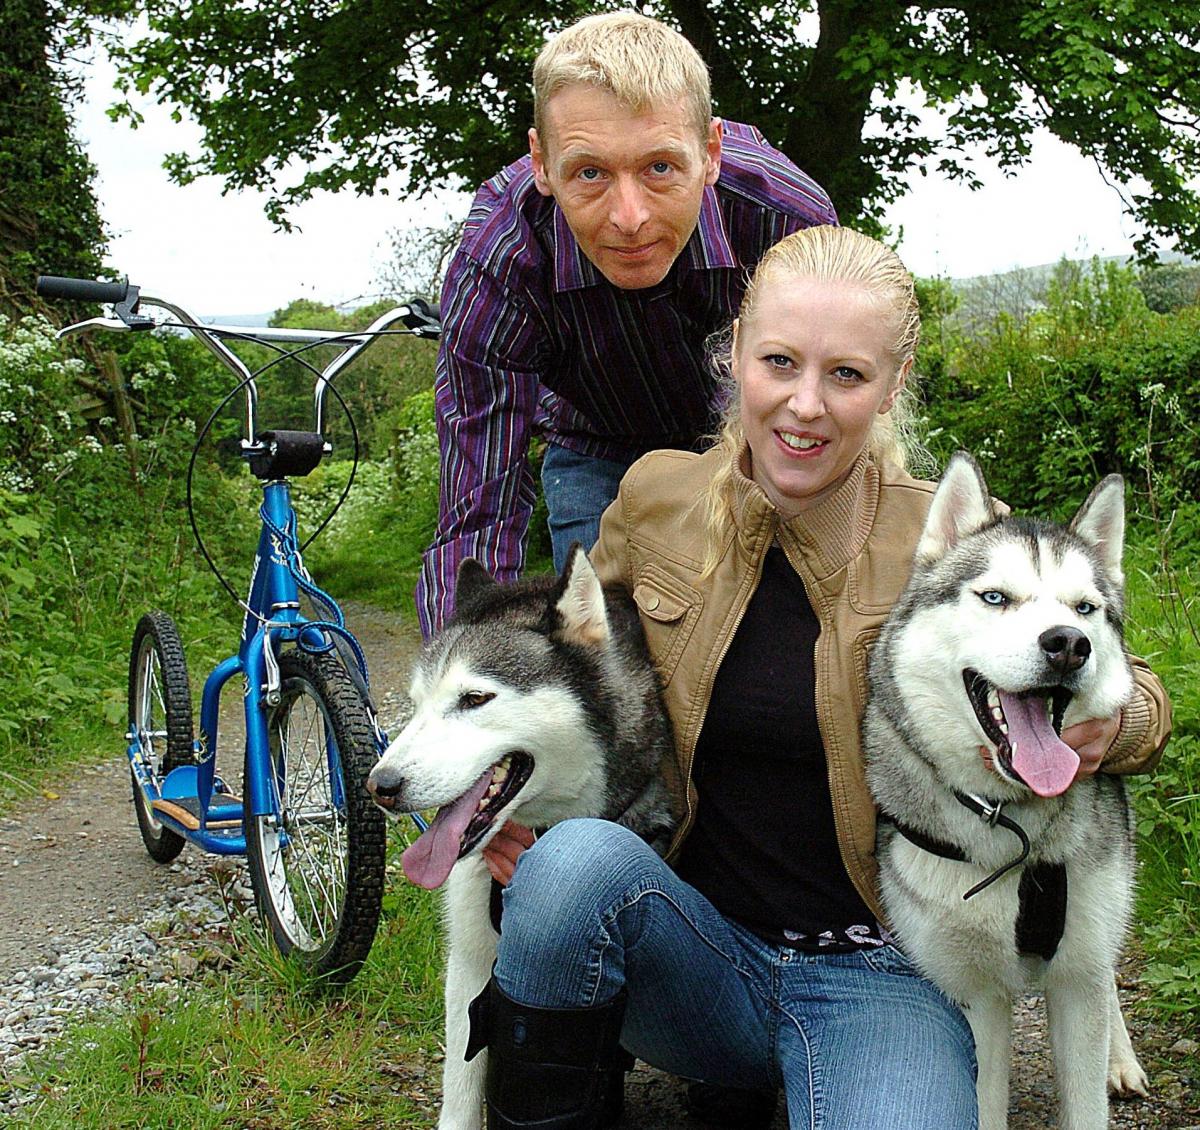 A team of huskies is more likely to be associated with a white Christmas than a white wedding. But for bride-to-be Carrie Steel arriving at St Peter’s Church, Addingham, driven by a team of her favourite dog breed is her dream for her big day. 